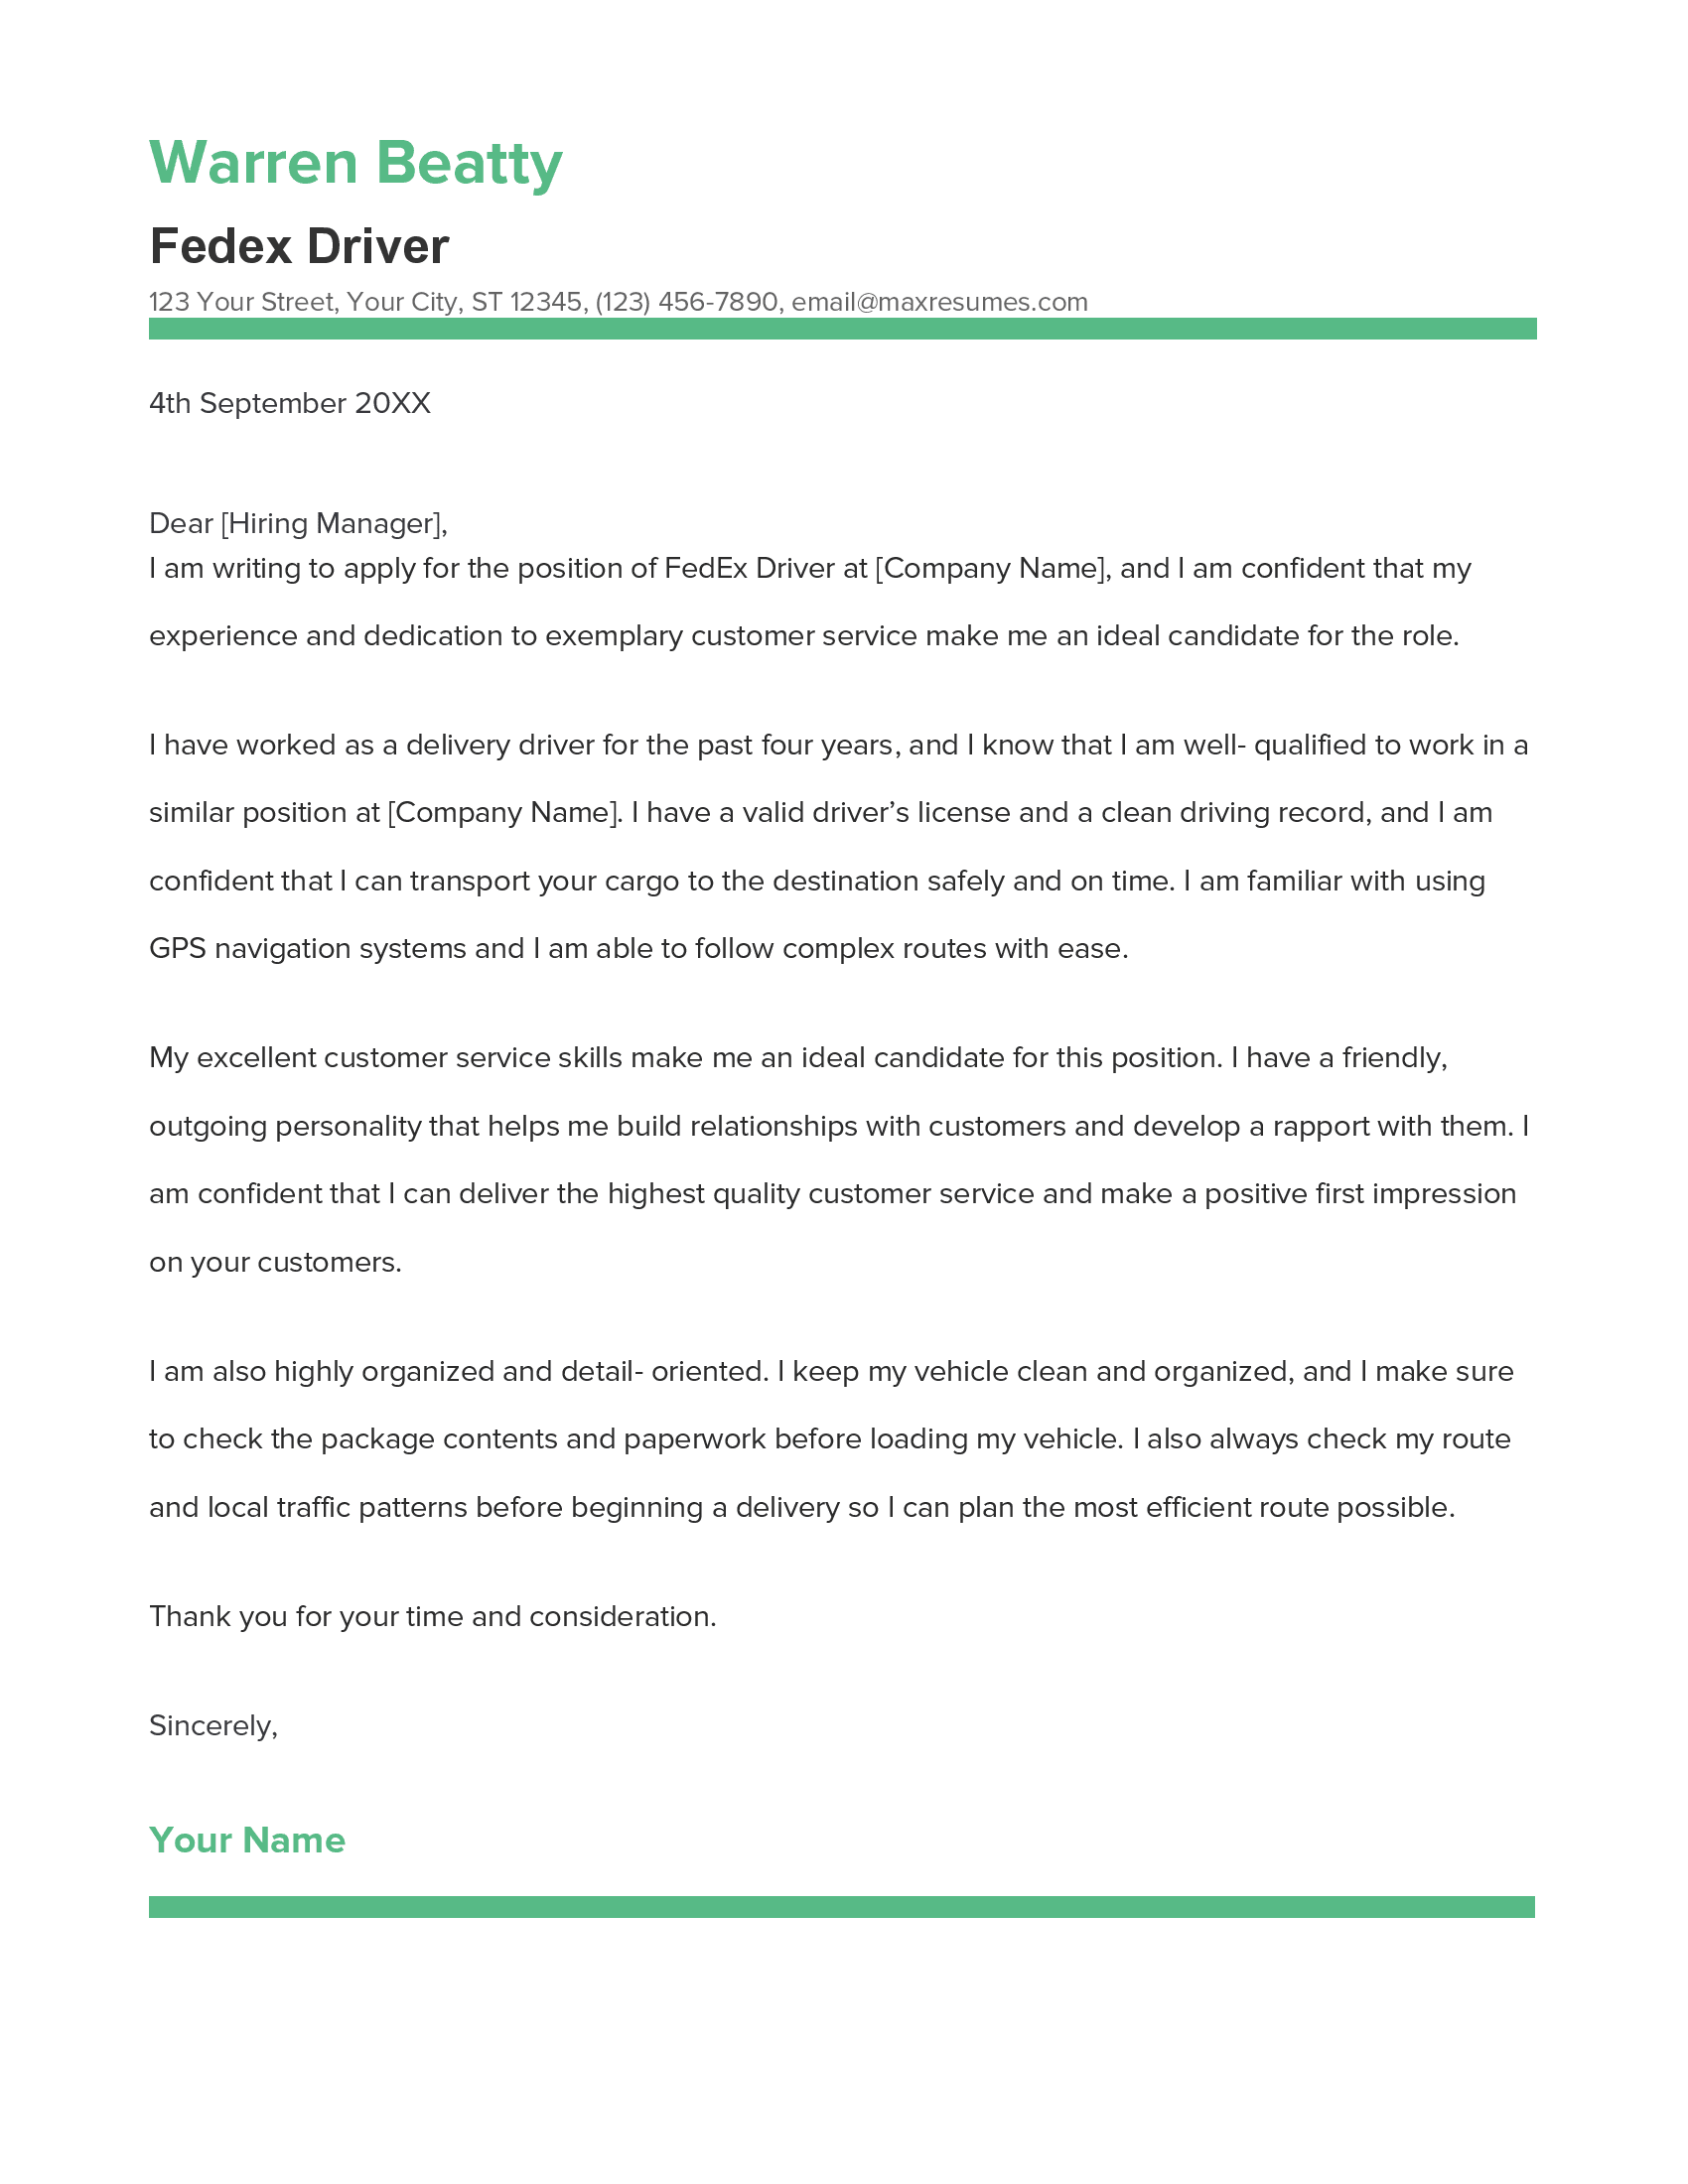 Fedex Driver Cover Letter Example